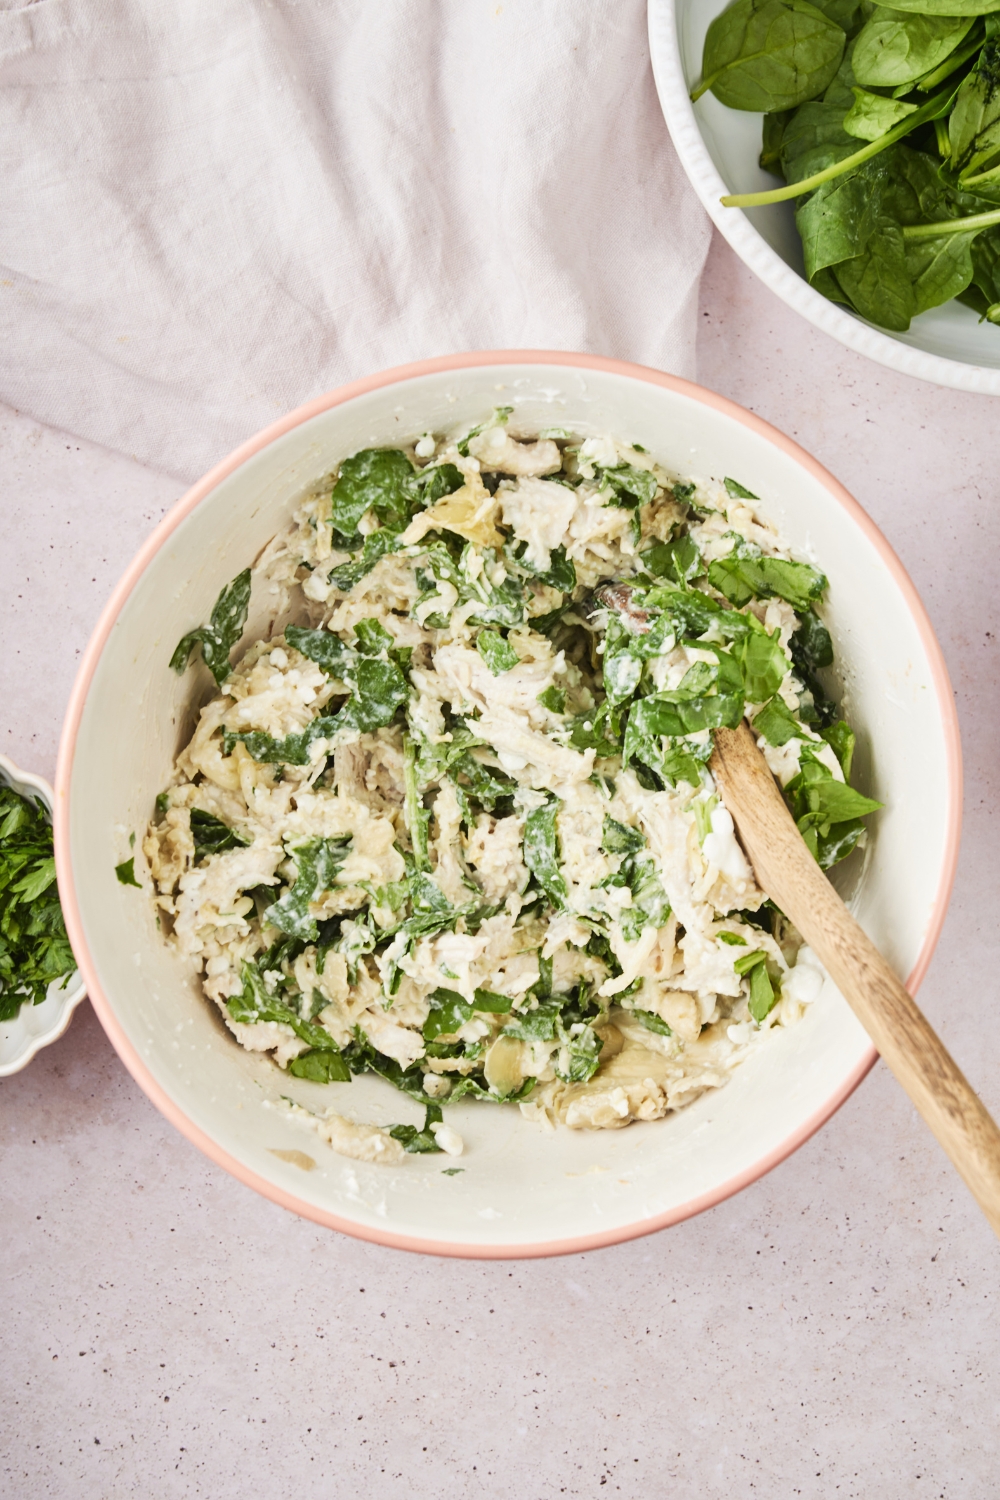 A bowl of shredded chicken mixed with artichokes and spinach in a cream sauce, with a wooden spoon in the bowl.